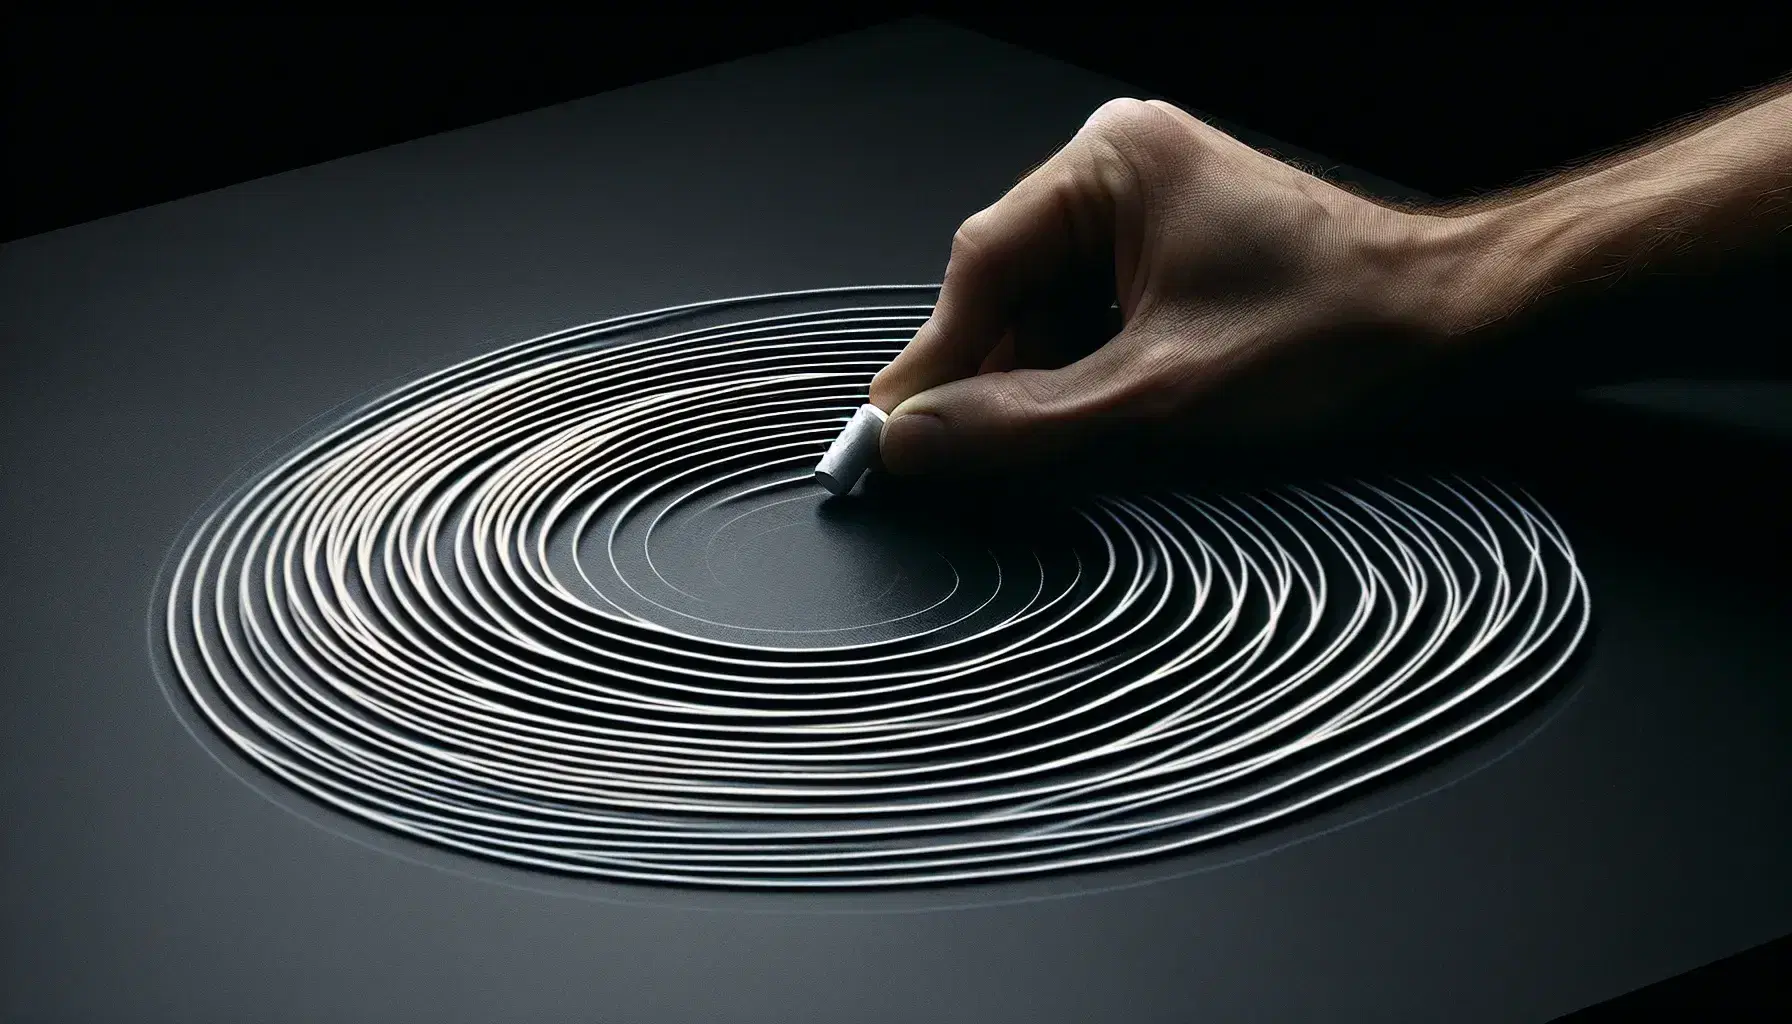 Hand drawing concentric arcs with white chalk on a blackboard, creating a ripple effect, with a focus on the precise, reflective chalk lines.